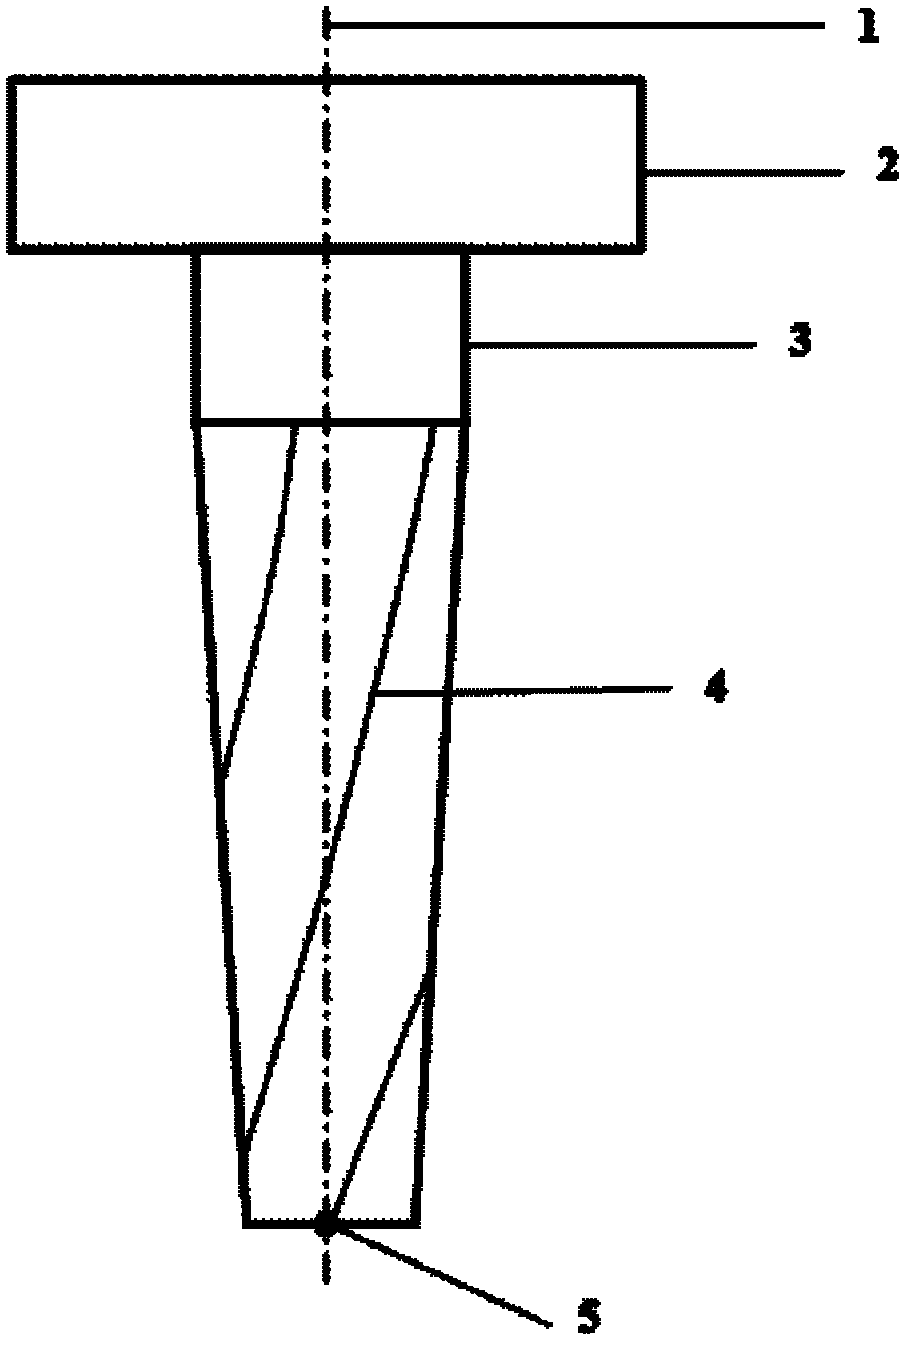 Five-axis side milling cutting force predicting method based on ACIS platform